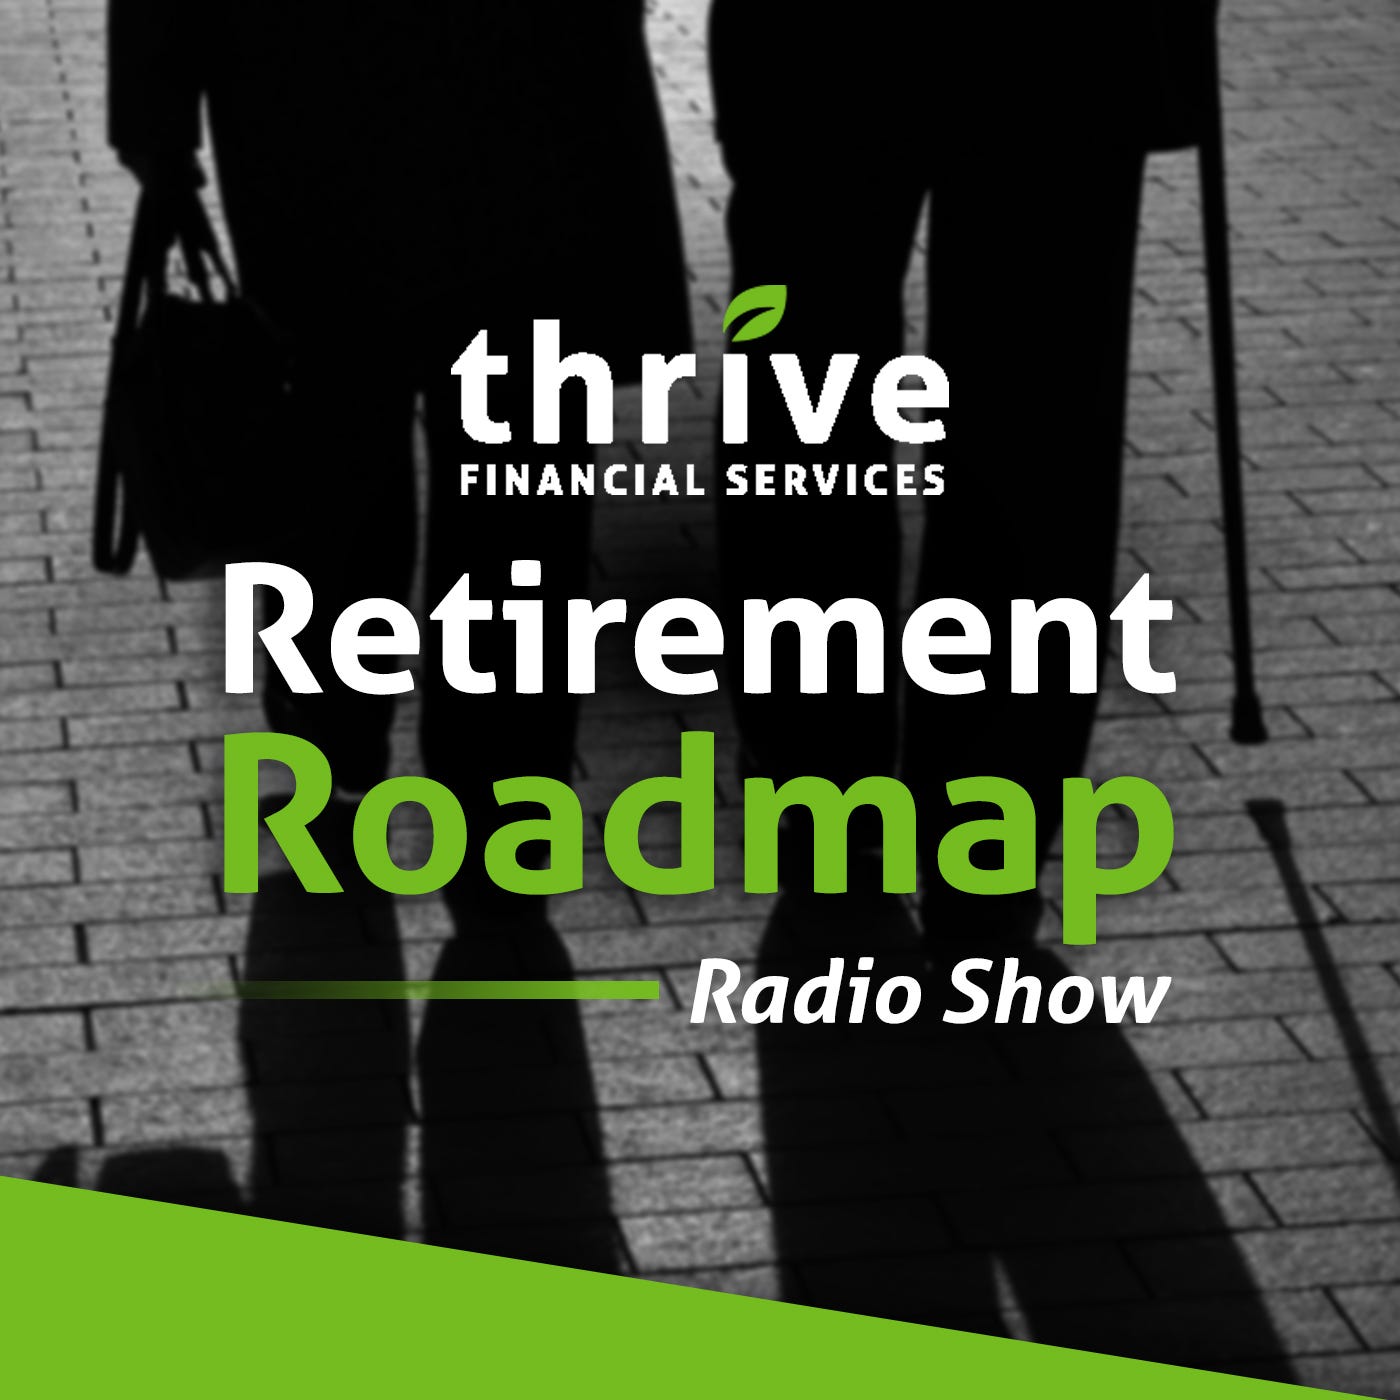 January 25, 2020 |Thrive Financial Services